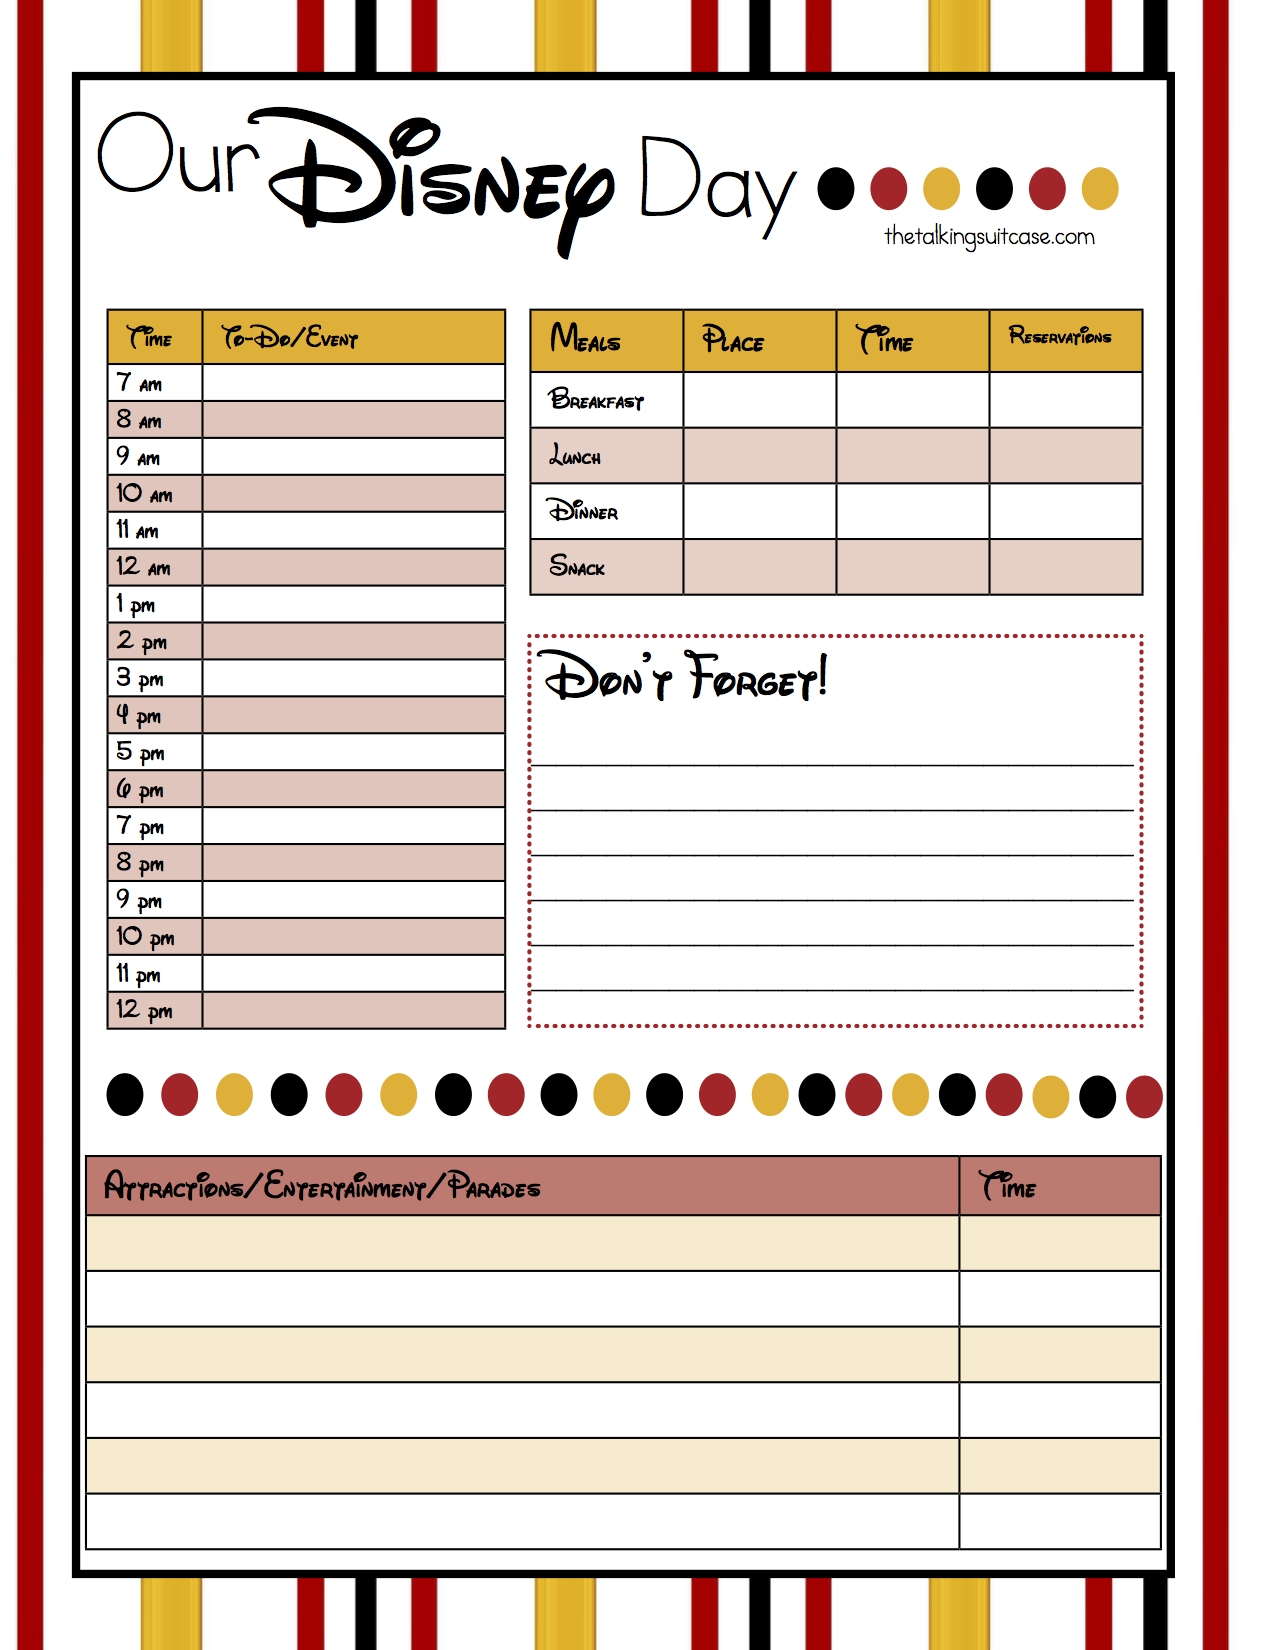 Disney World Itinerary Template Download 2020  Calendar within Disney World Itinerary Template